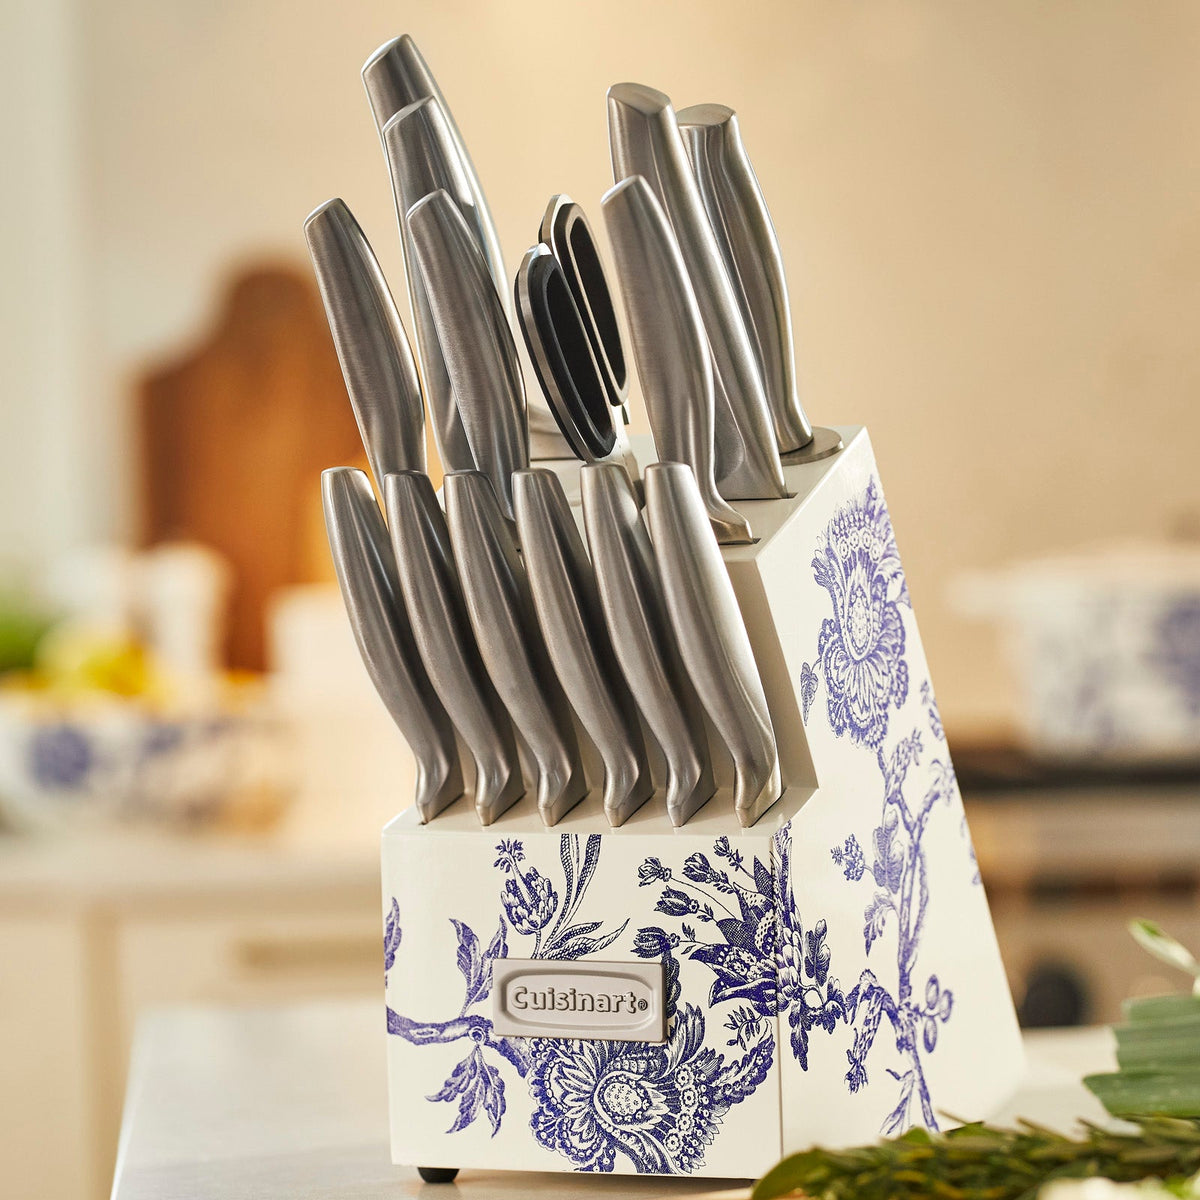 A Caskata X Cuisinart Limited Edition Arcadia 15 pc. German Stainless Steel Cutlery Block, crafted from high carbon German stainless steel and showcased in blue and white,